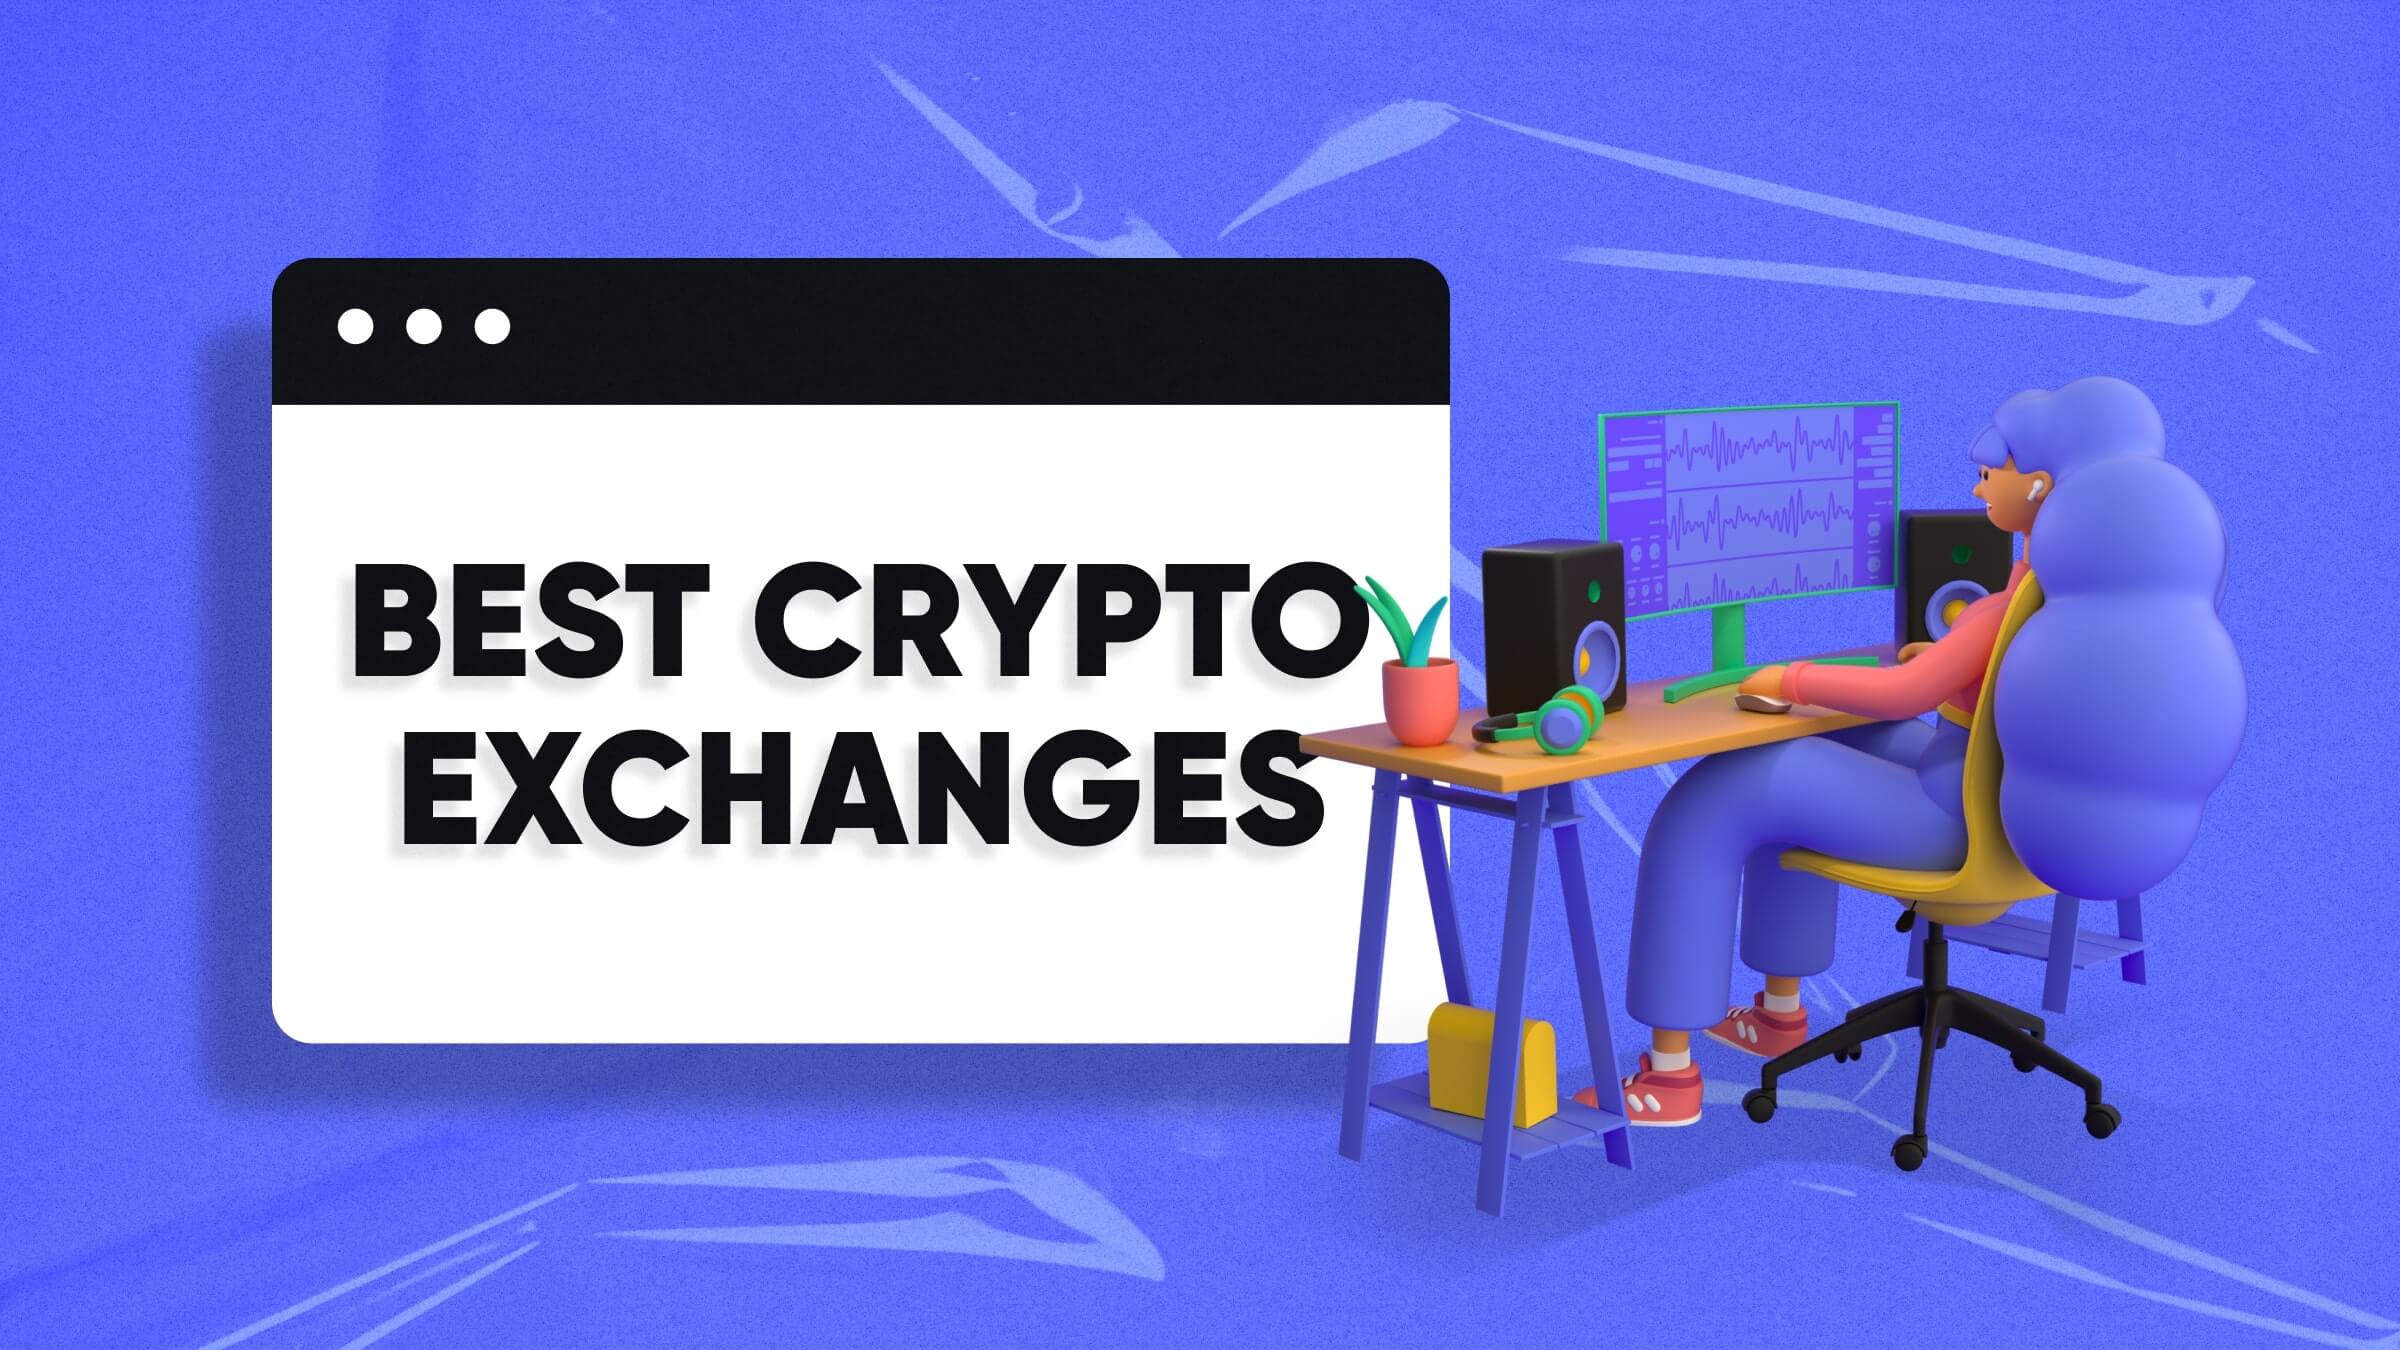 Best Crypto Exchange Reviews - Find Top Crypto Exchanges